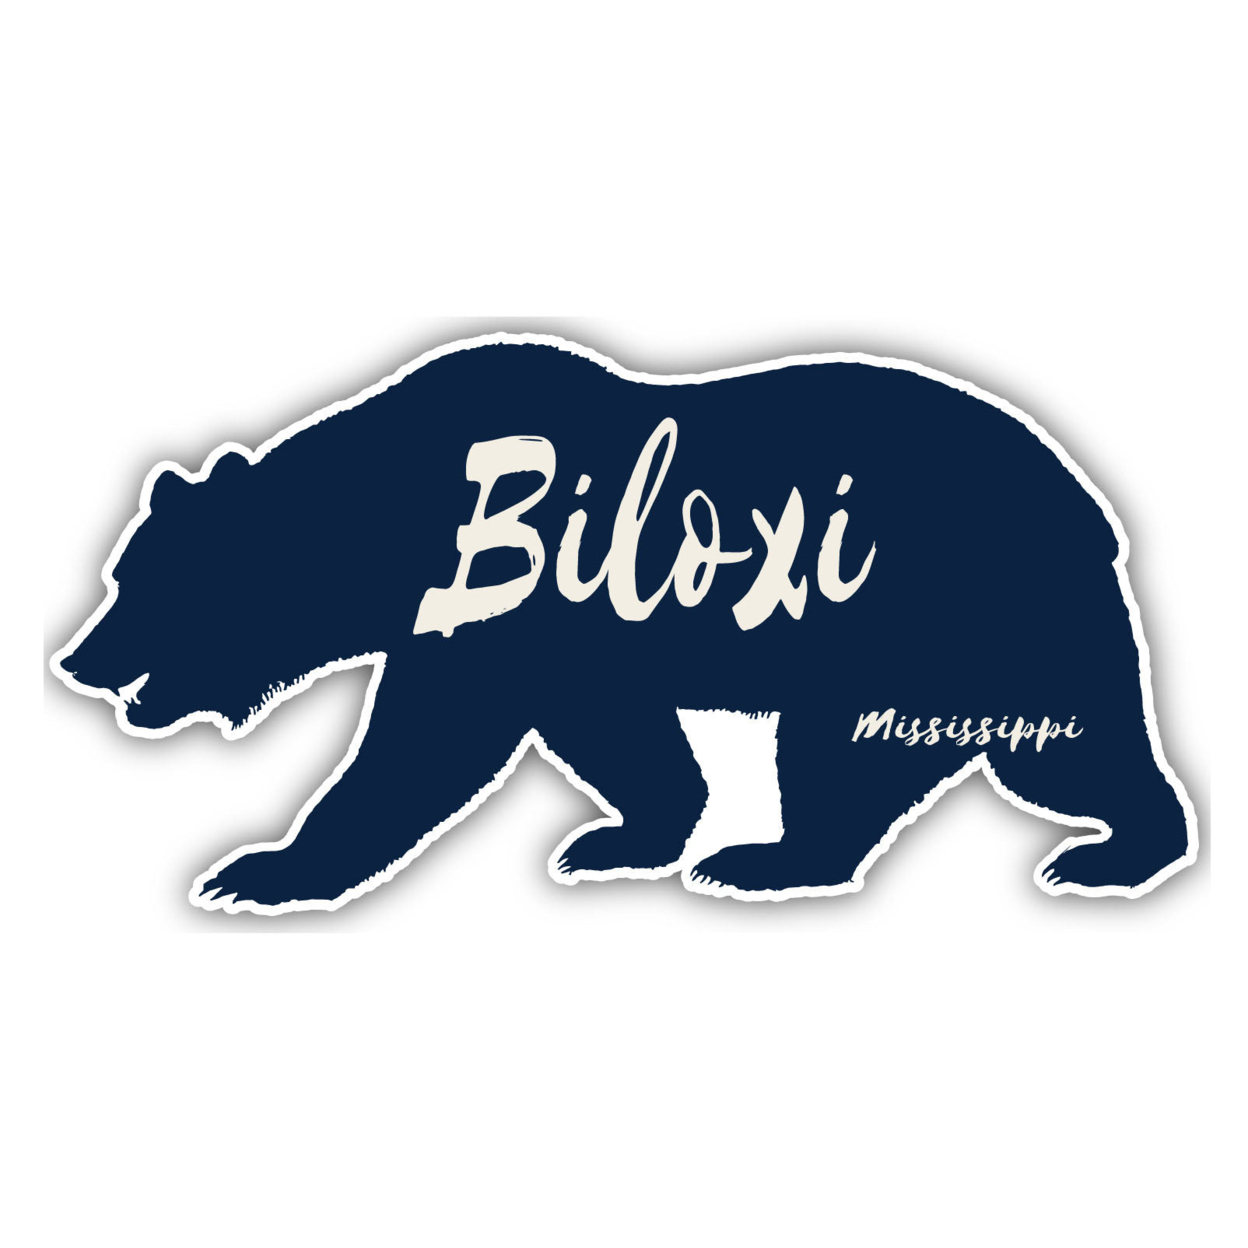 Biloxi Mississippi Souvenir Decorative Stickers (Choose Theme And Size) - 4-Pack, 12-Inch, Camp Life